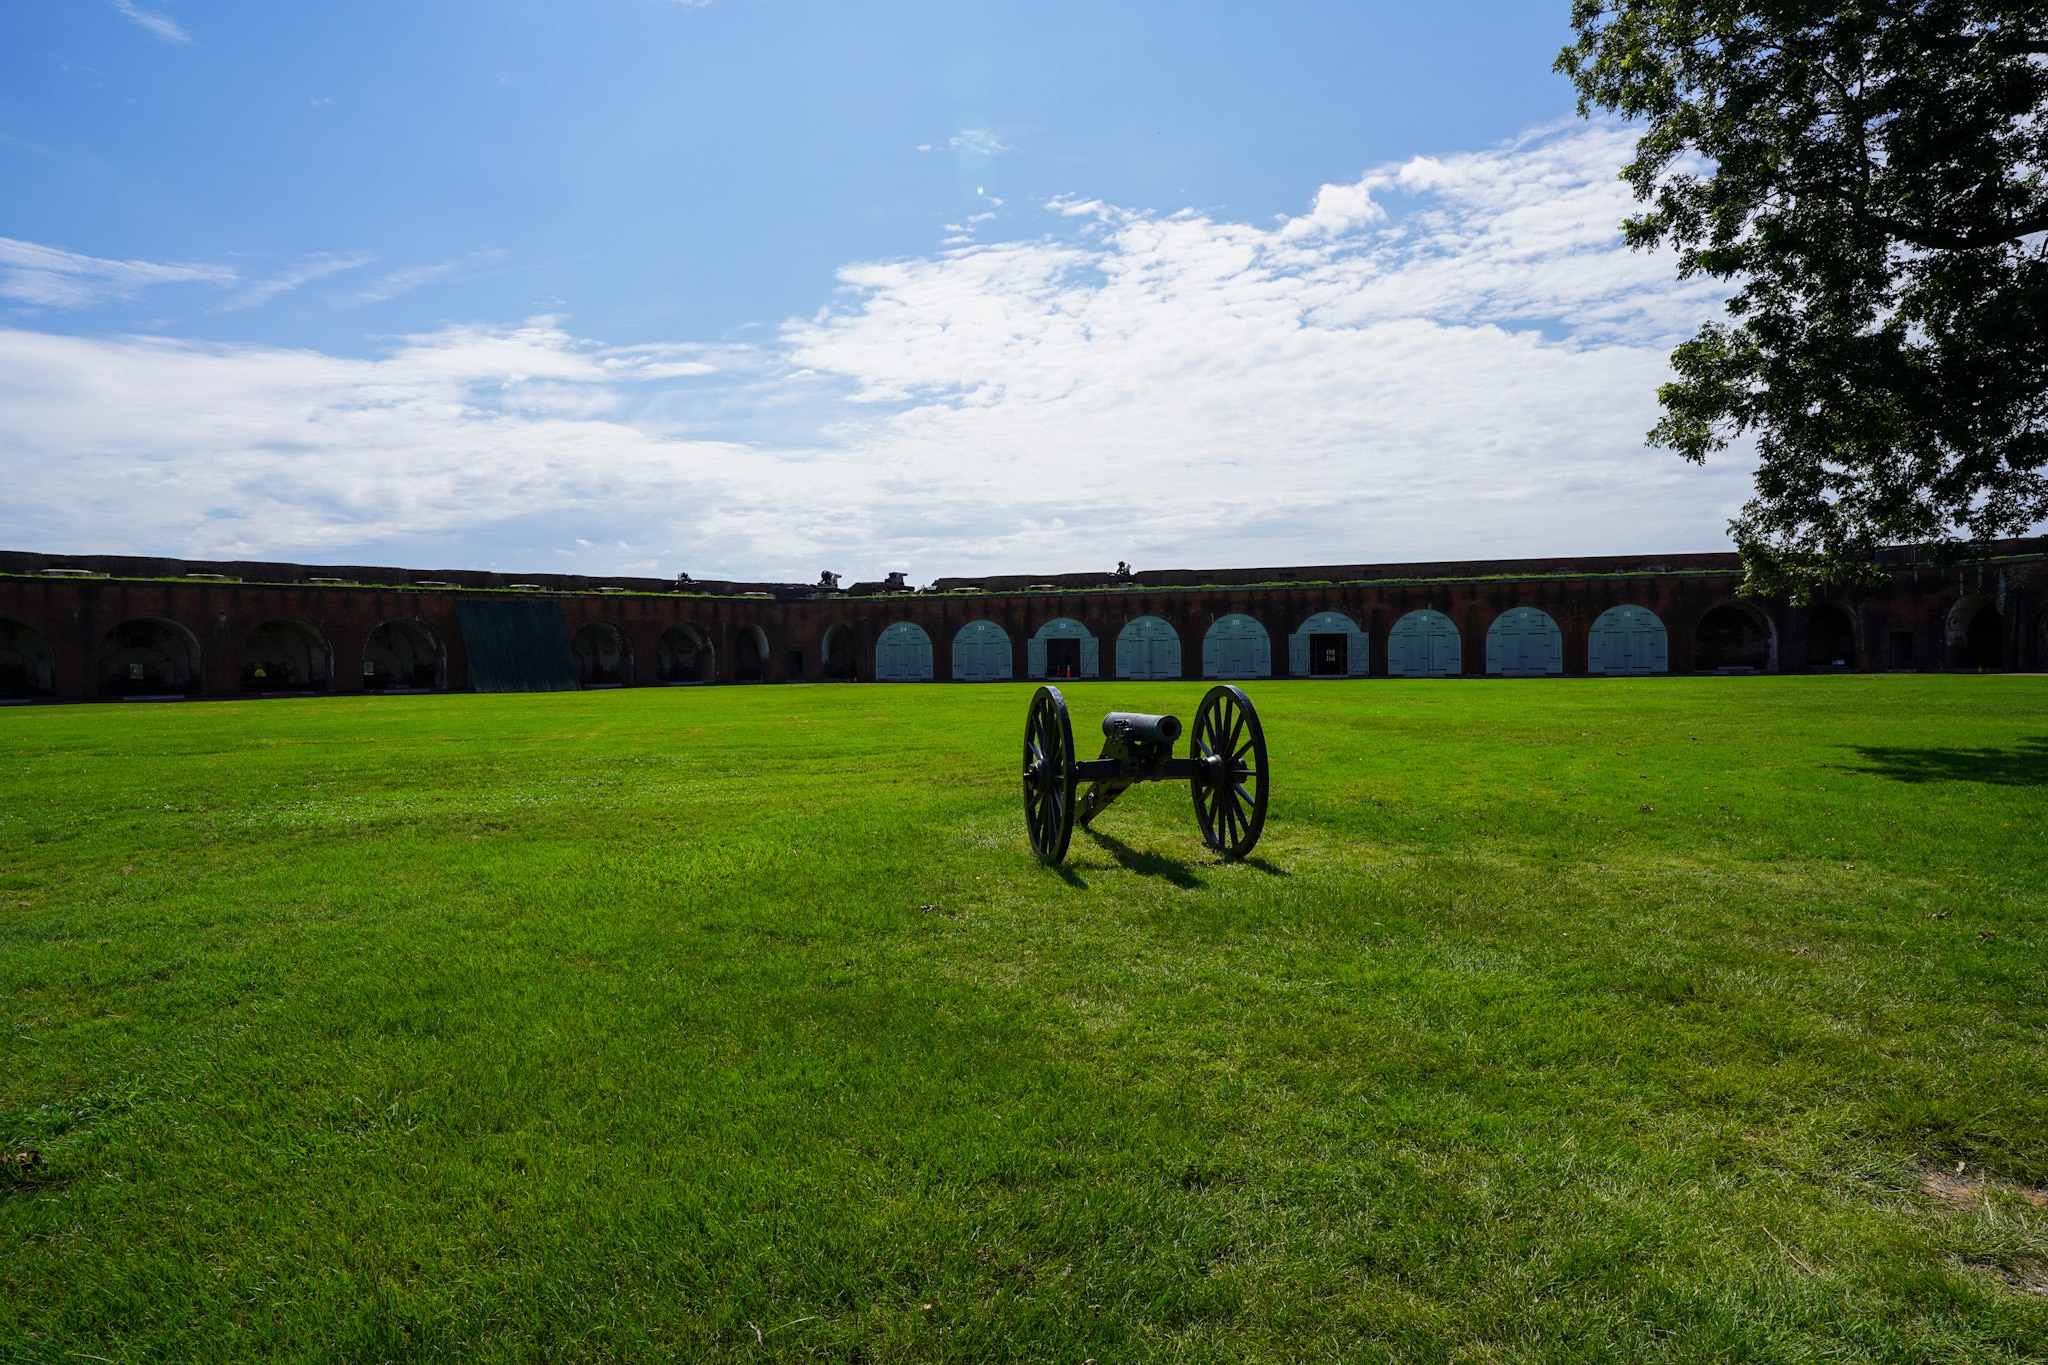 Cannon on Parade Grounds